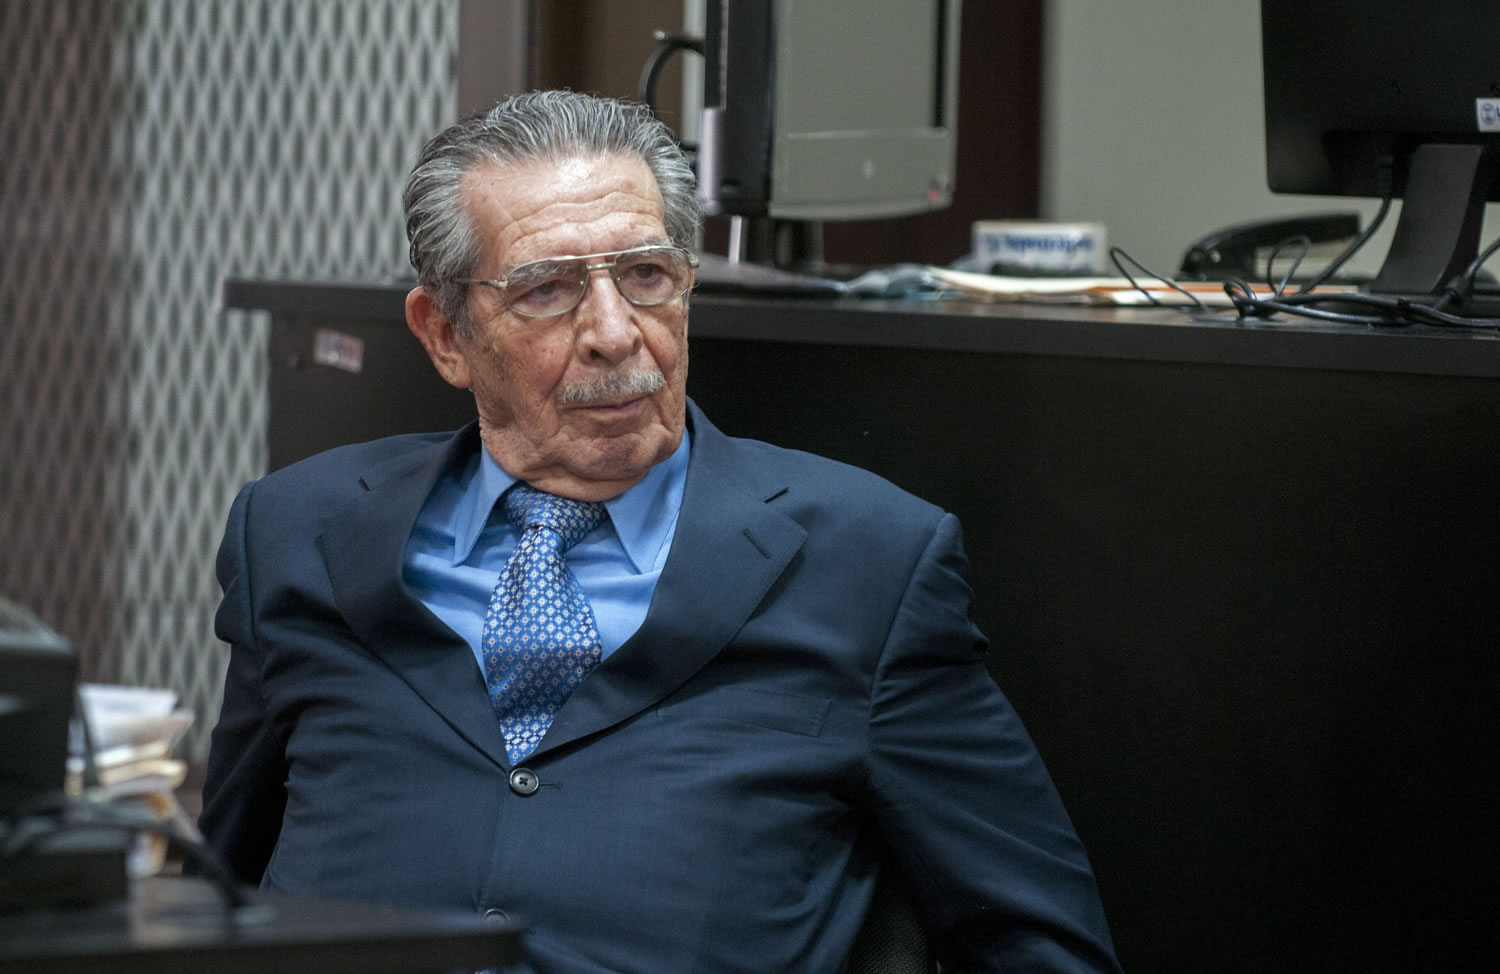 Efrain Rios Montt, the former dictator of Guatamala, was found guilty of genocide and war crime, but the conviction was overturned.